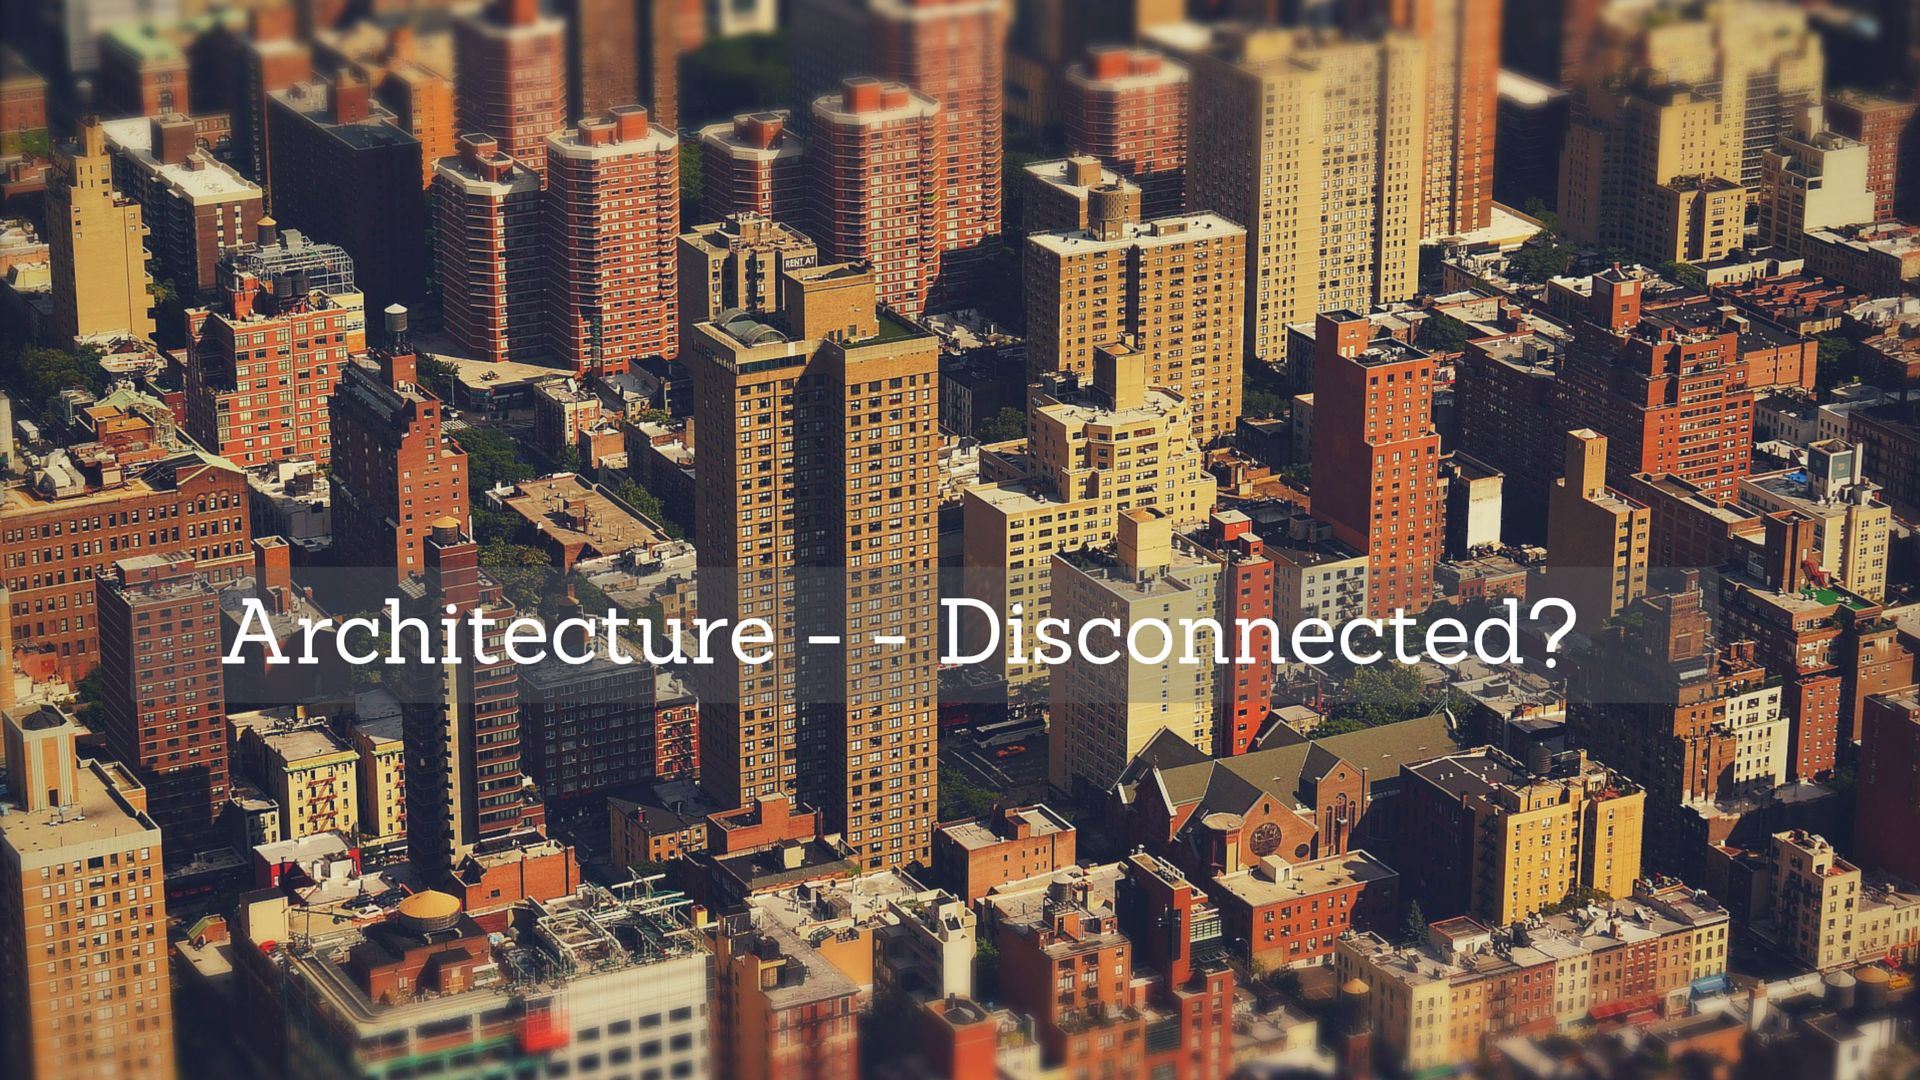 Architecture -- Disconnected?